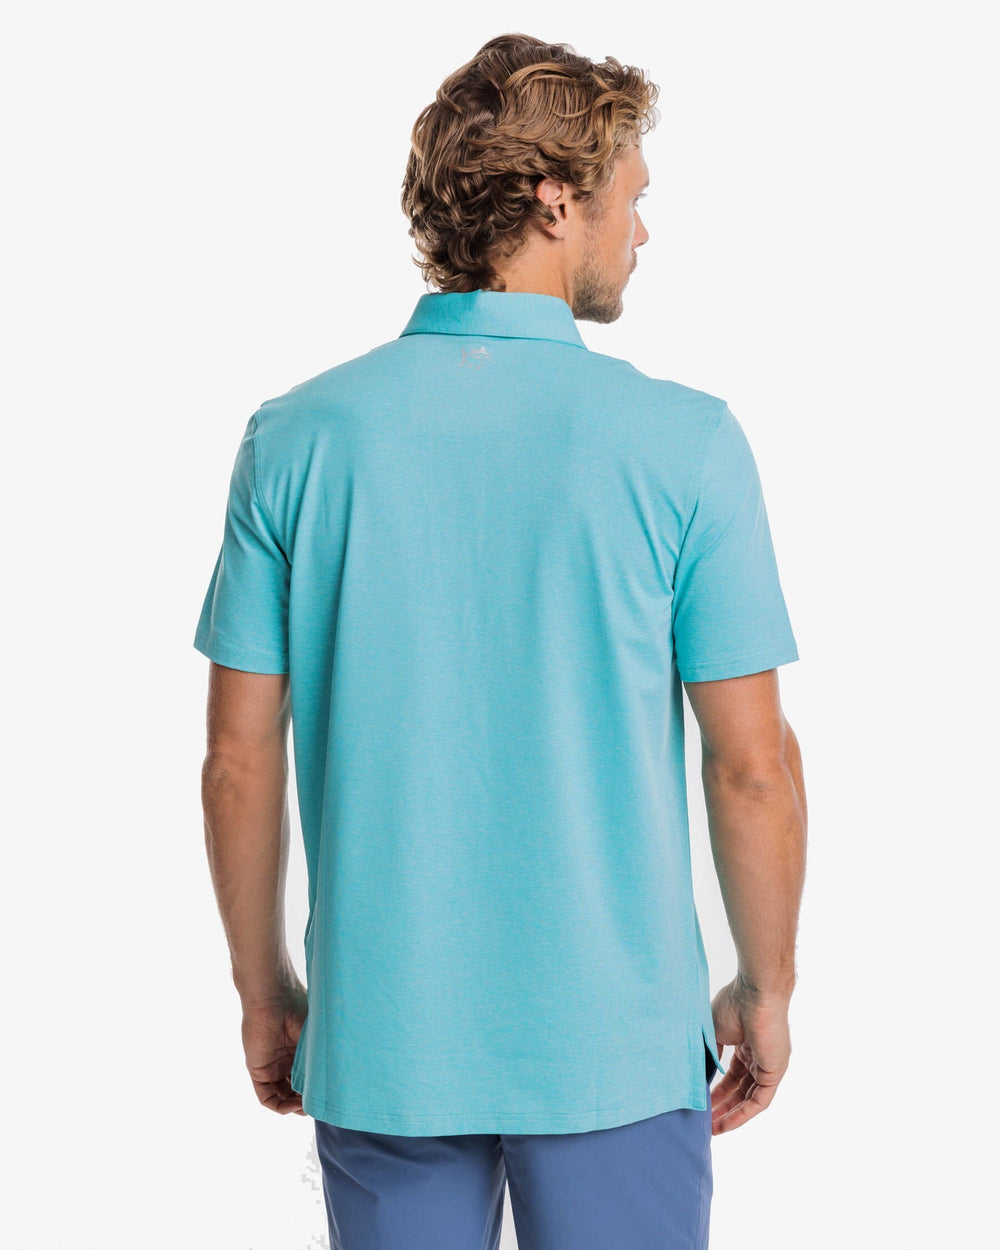 The back view of the brrr°®-eeze Heather Performance Polo Shirt by Southern Tide - Heather Tidal Wave